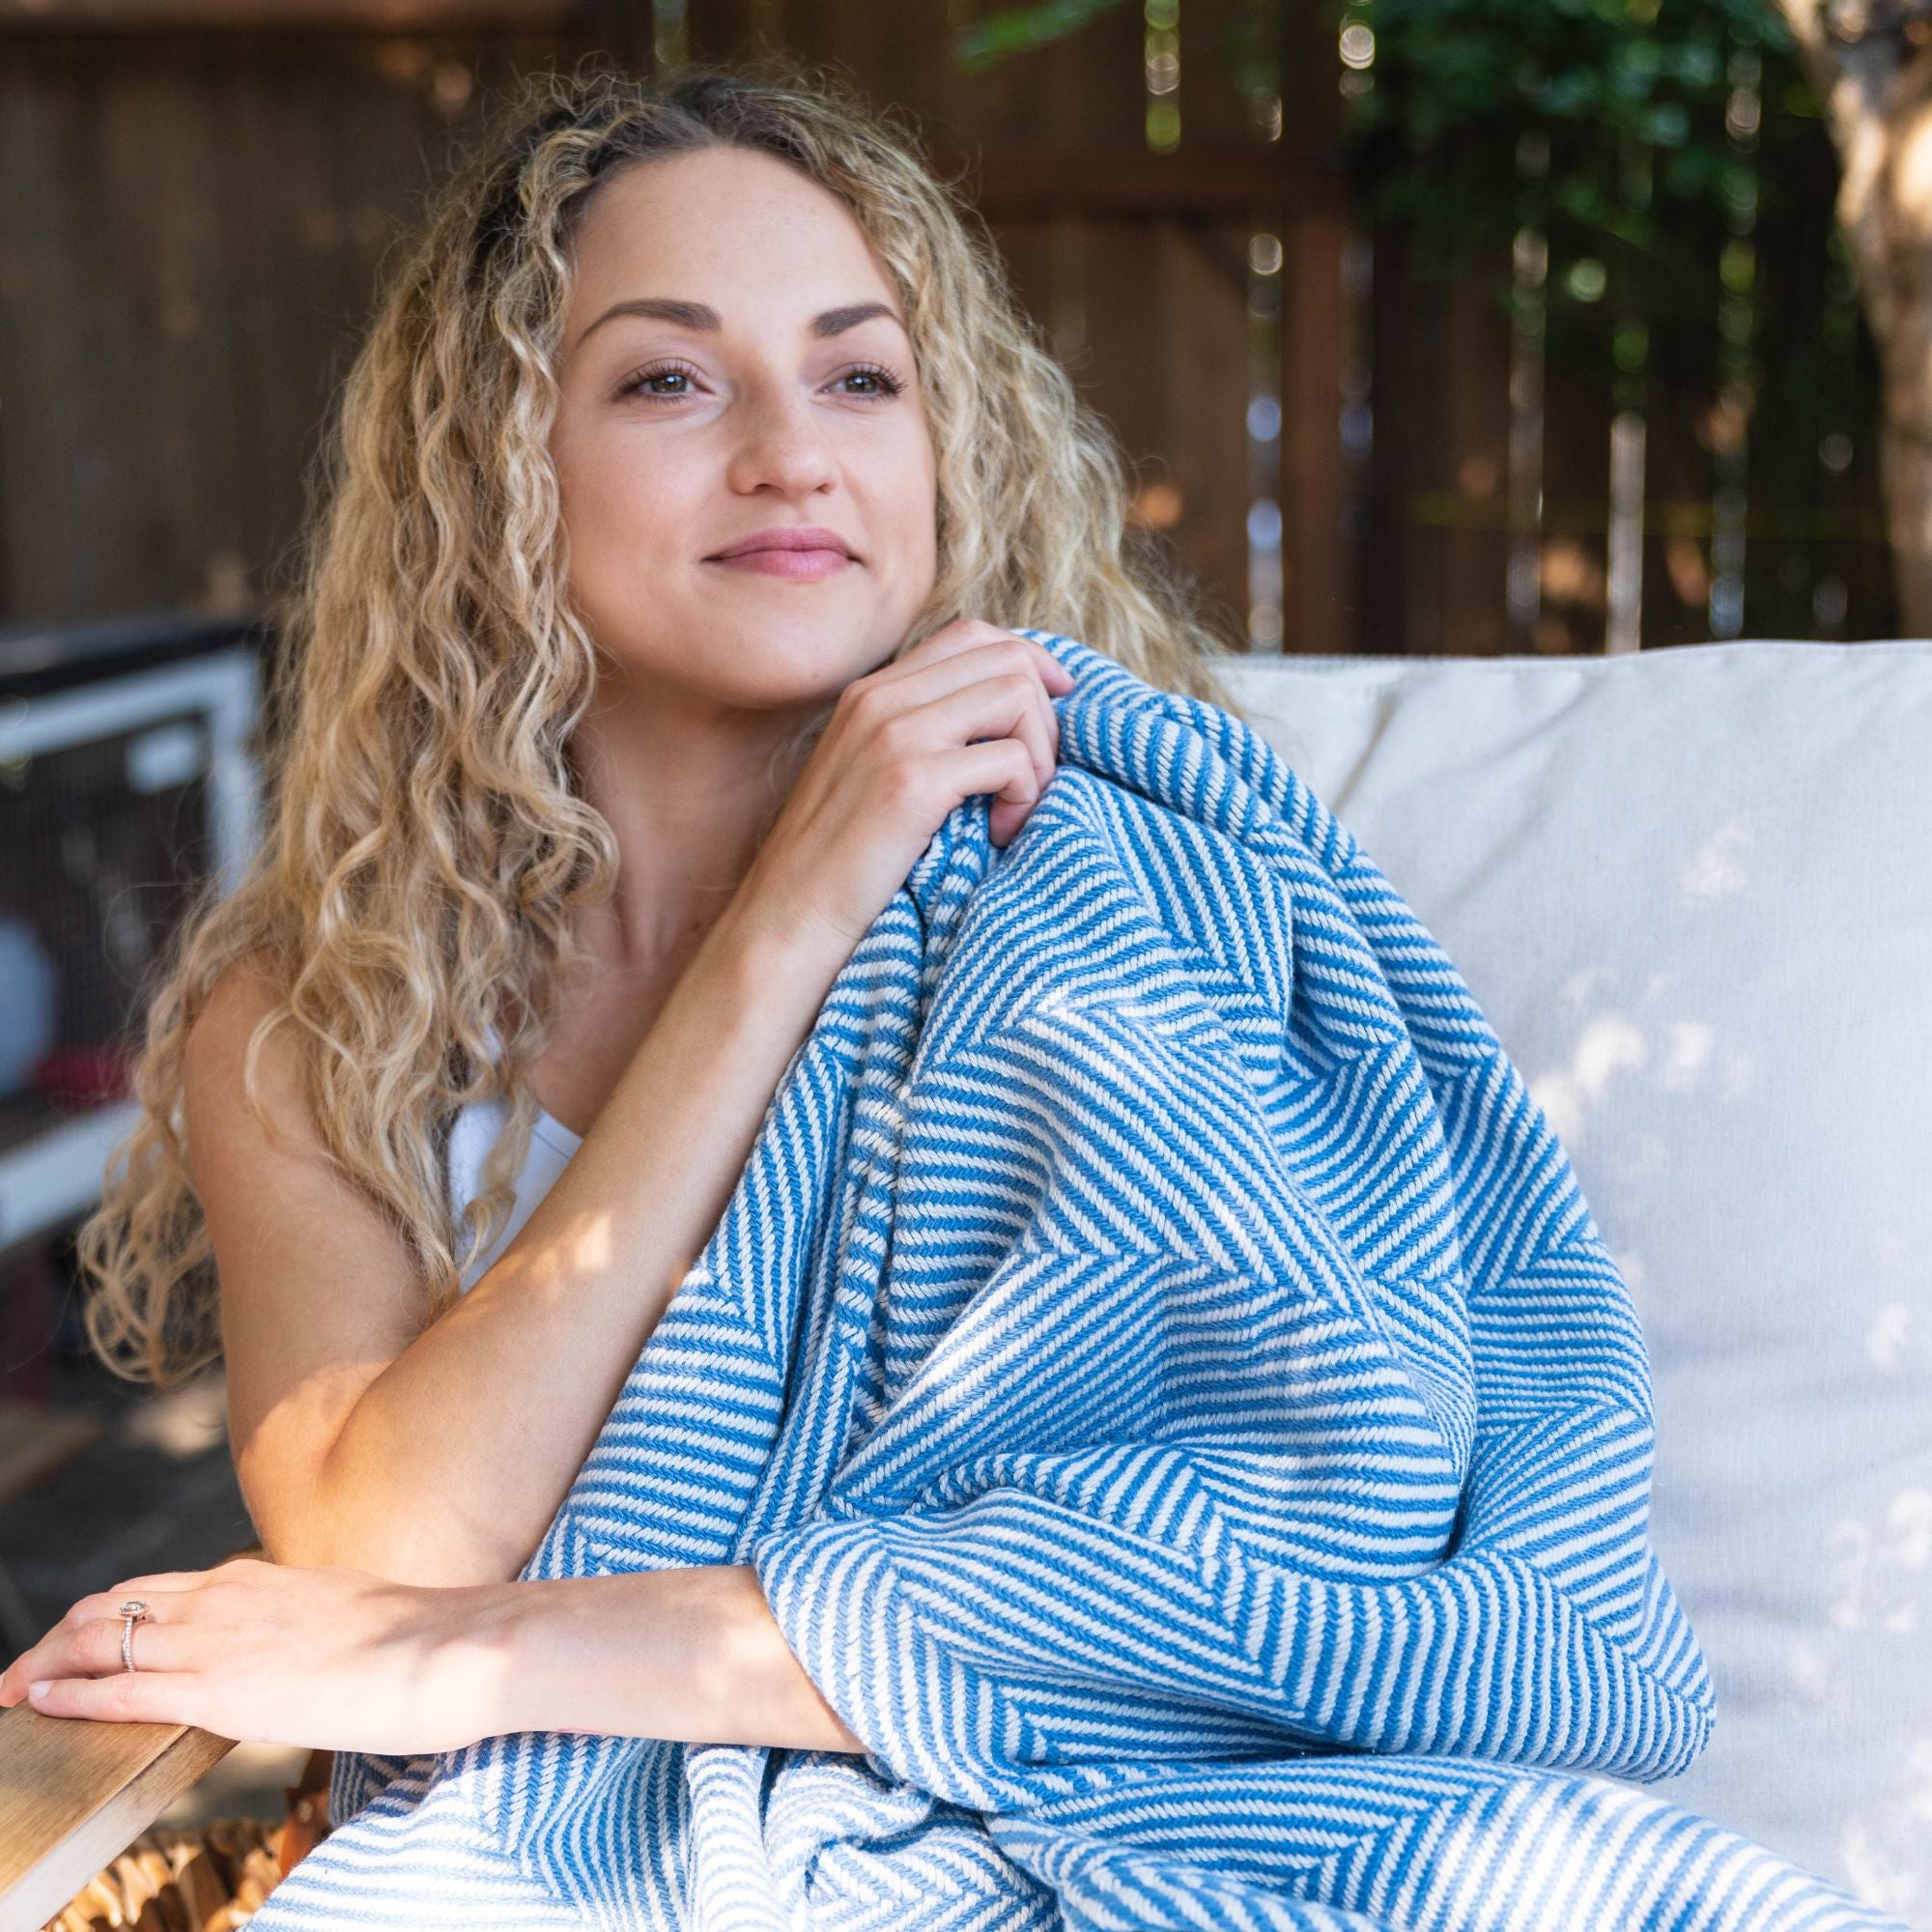 lady relaxing outside with a blue cotton blanket 